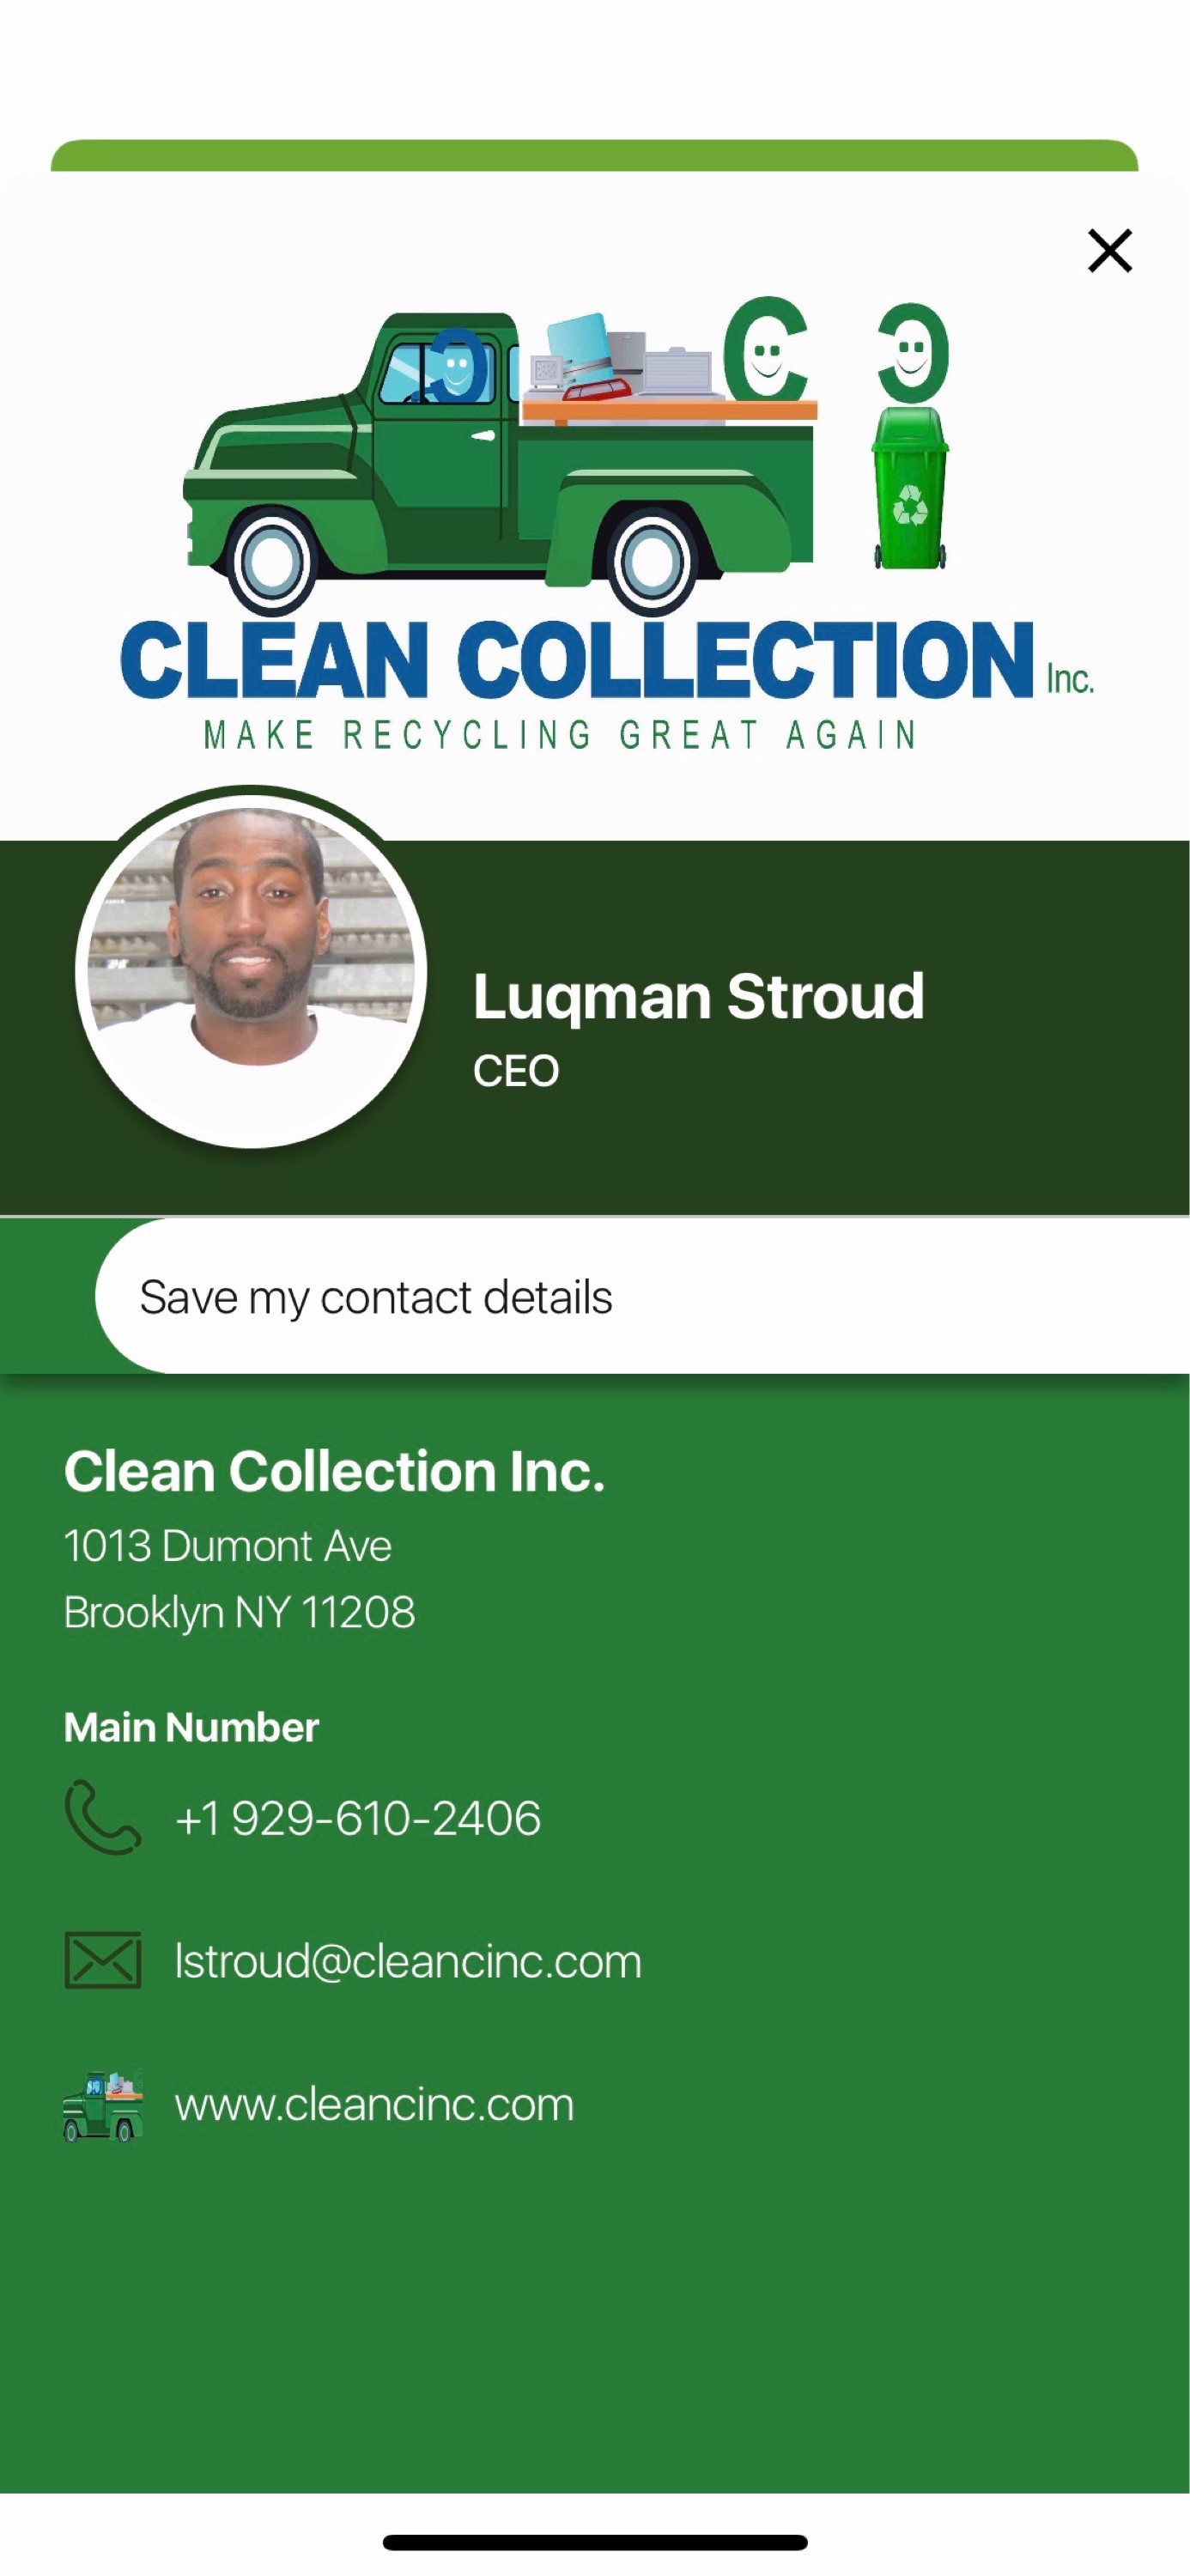 Clean Collection, Inc. Logo